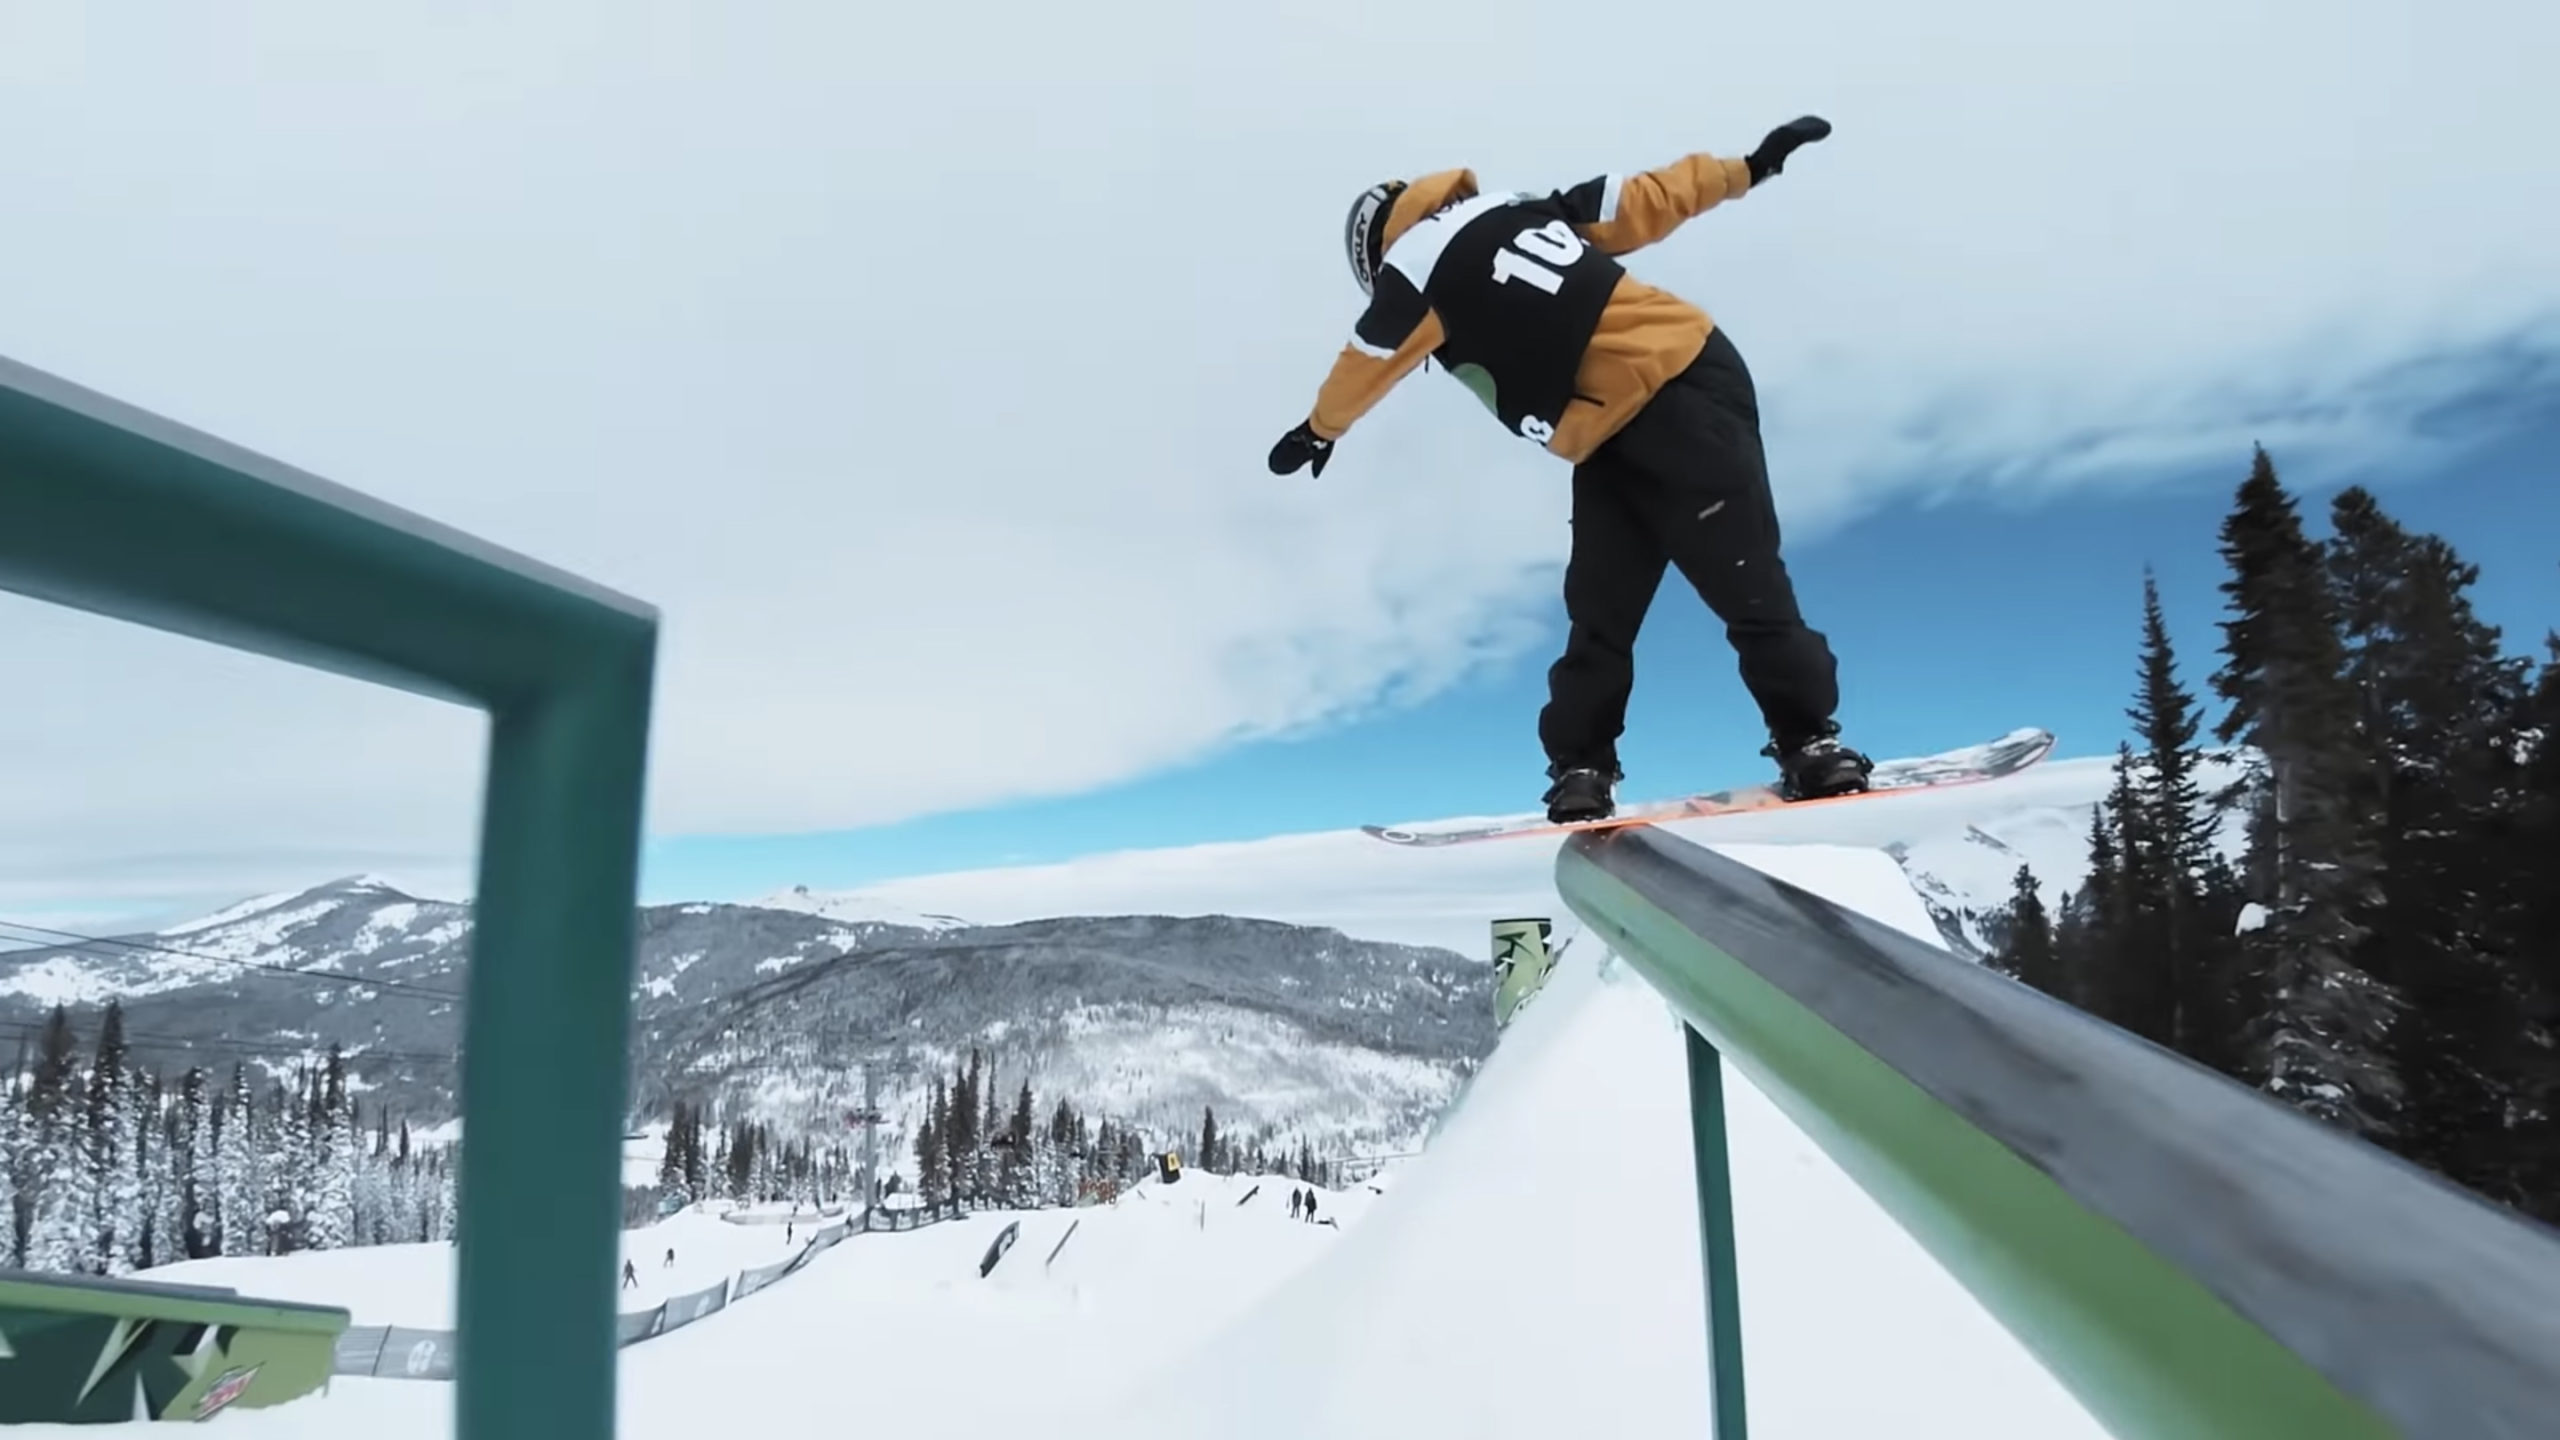 StaleLIFE Dew Tour Copper